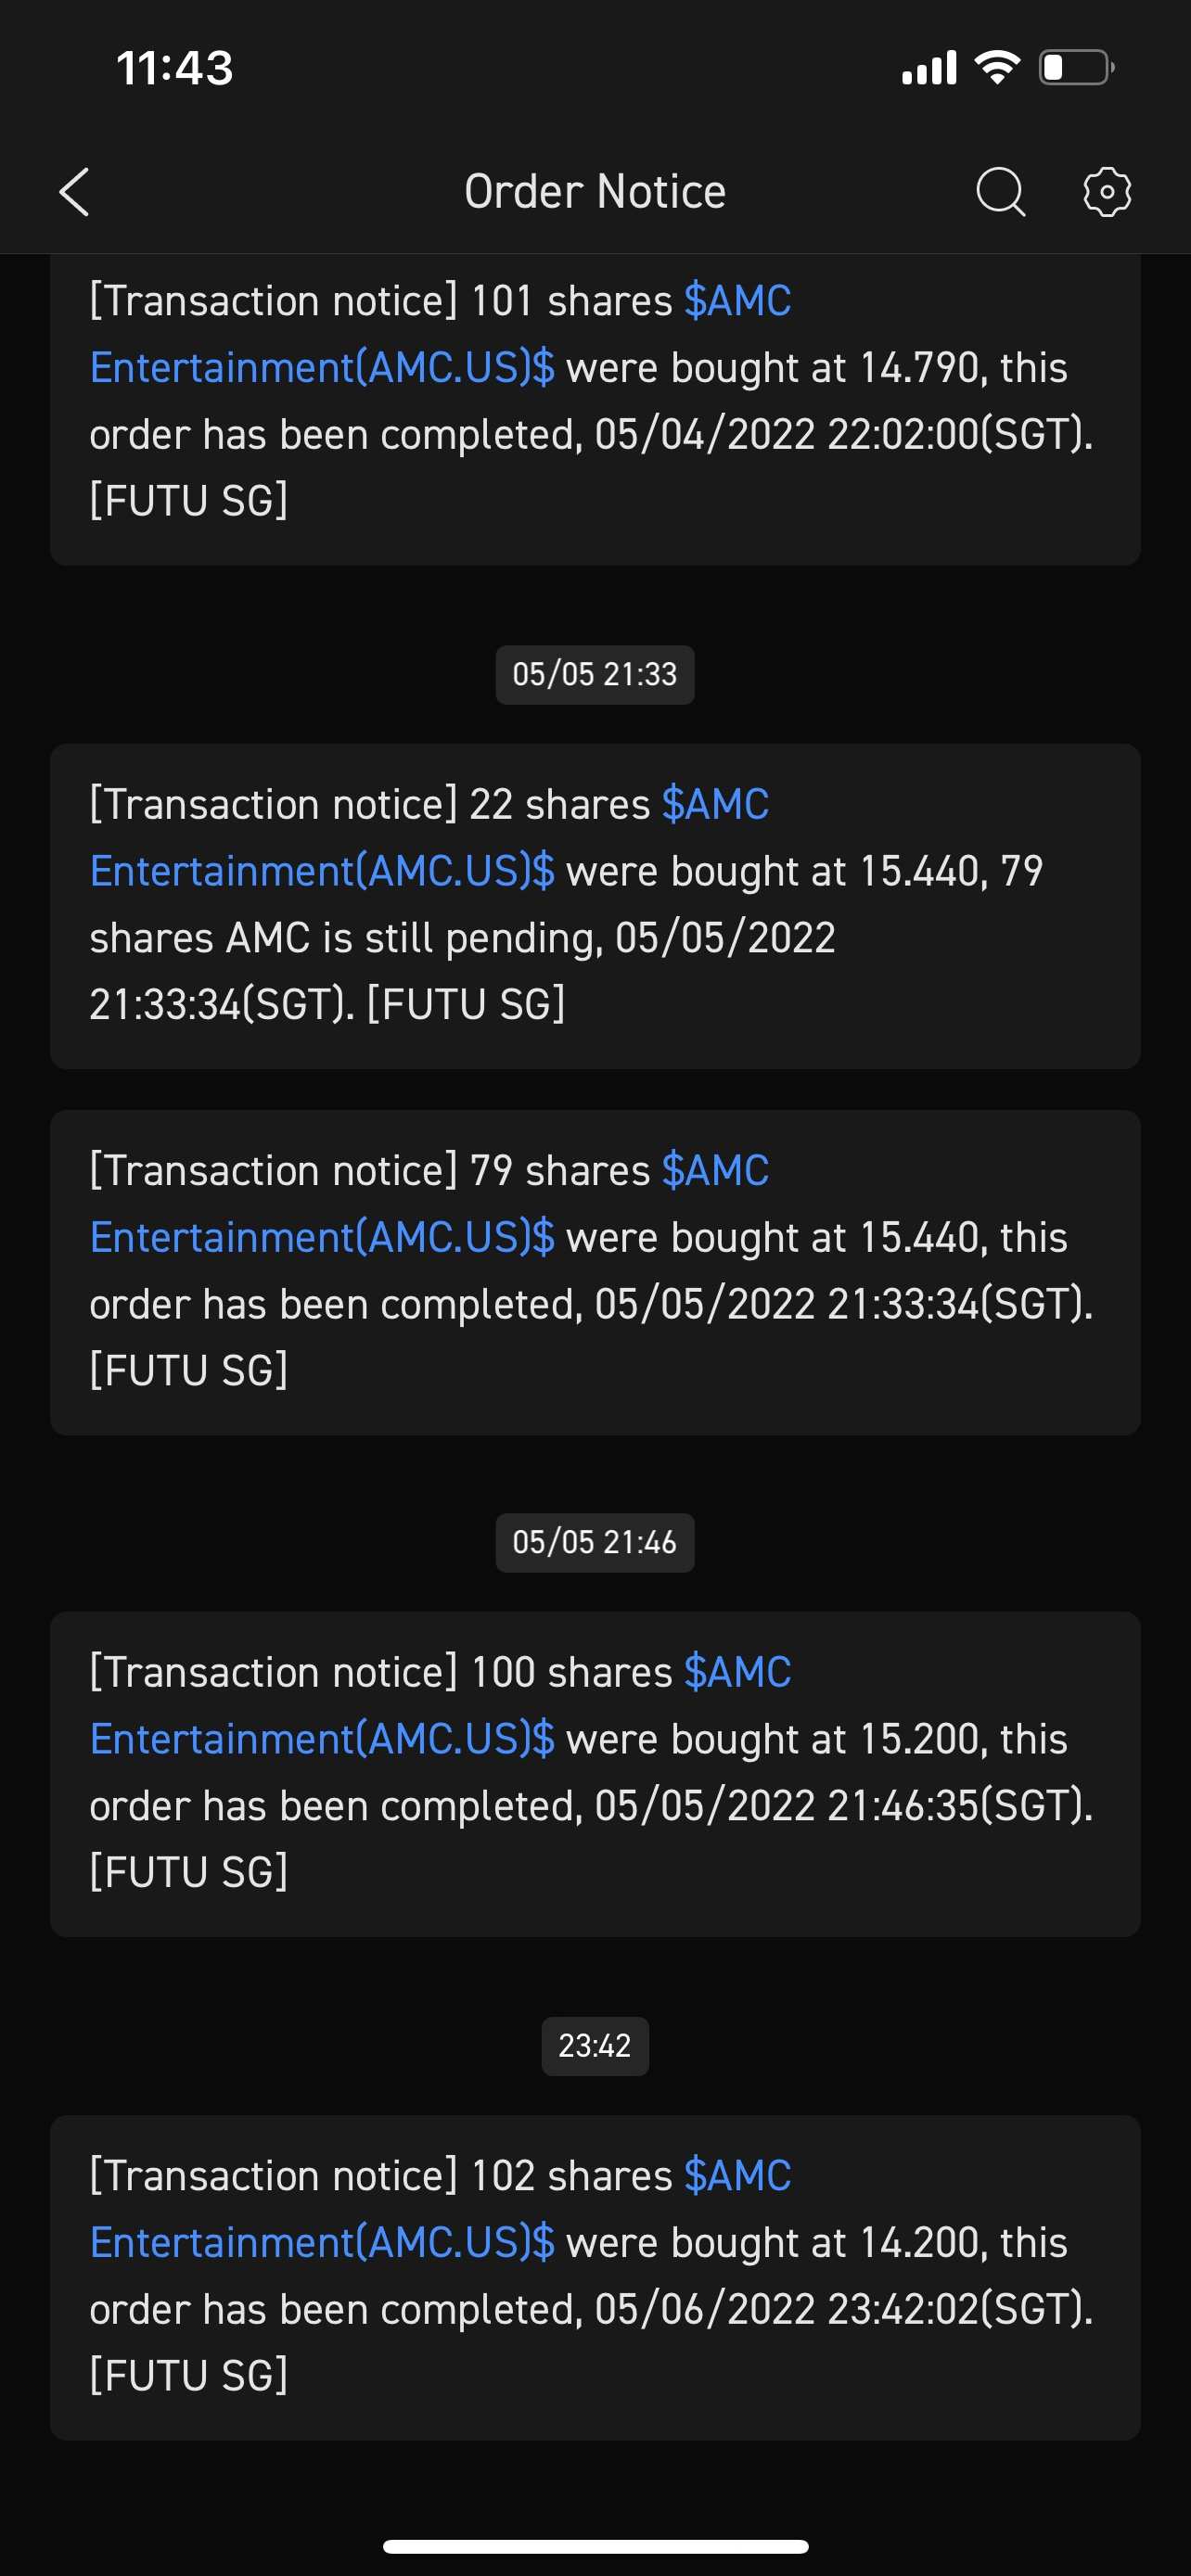 $AMC Entertainment(AMC.US)$ not pay day yet but no harm buying more in advance [Lol] 102 more!